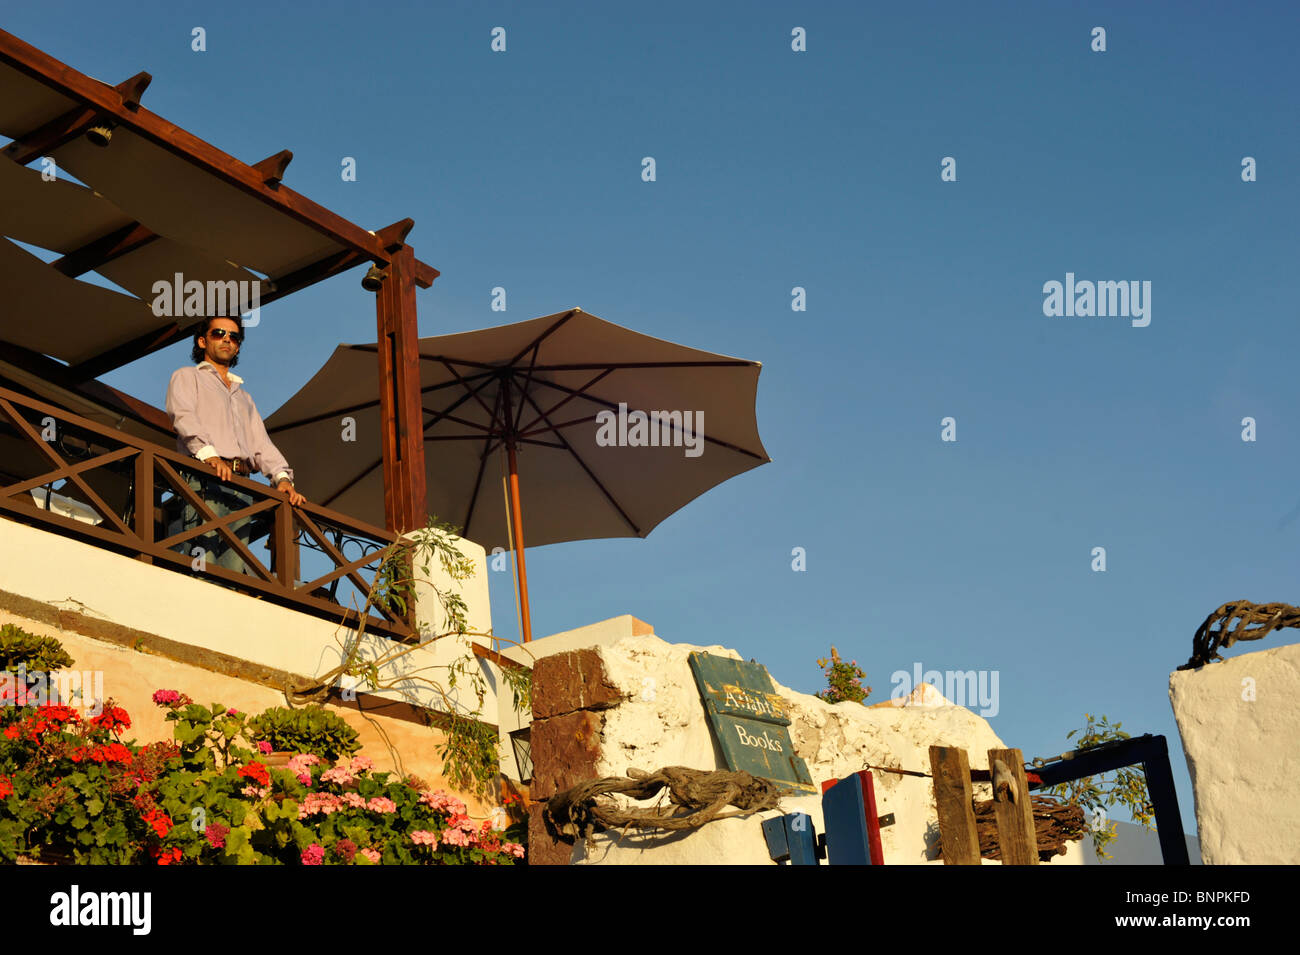 Waiter watching the sun set from an outdoor restaurant in the town of Oia Santorini Cyclades Islands Greece Stock Photo